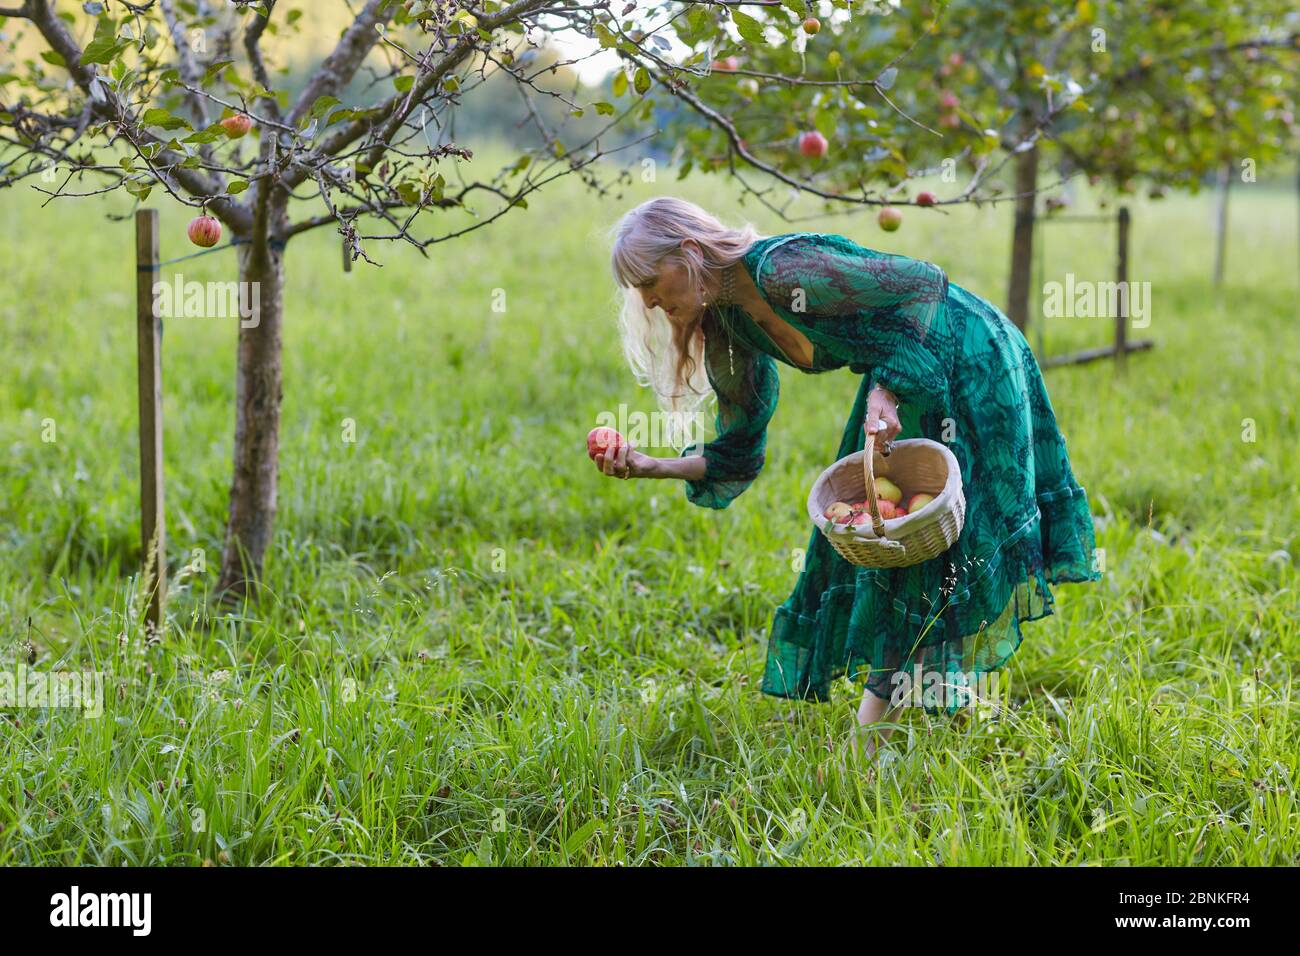 Apple harvest, apple tree, basket, woman collects apples, orchards, meadow, Stock Photo